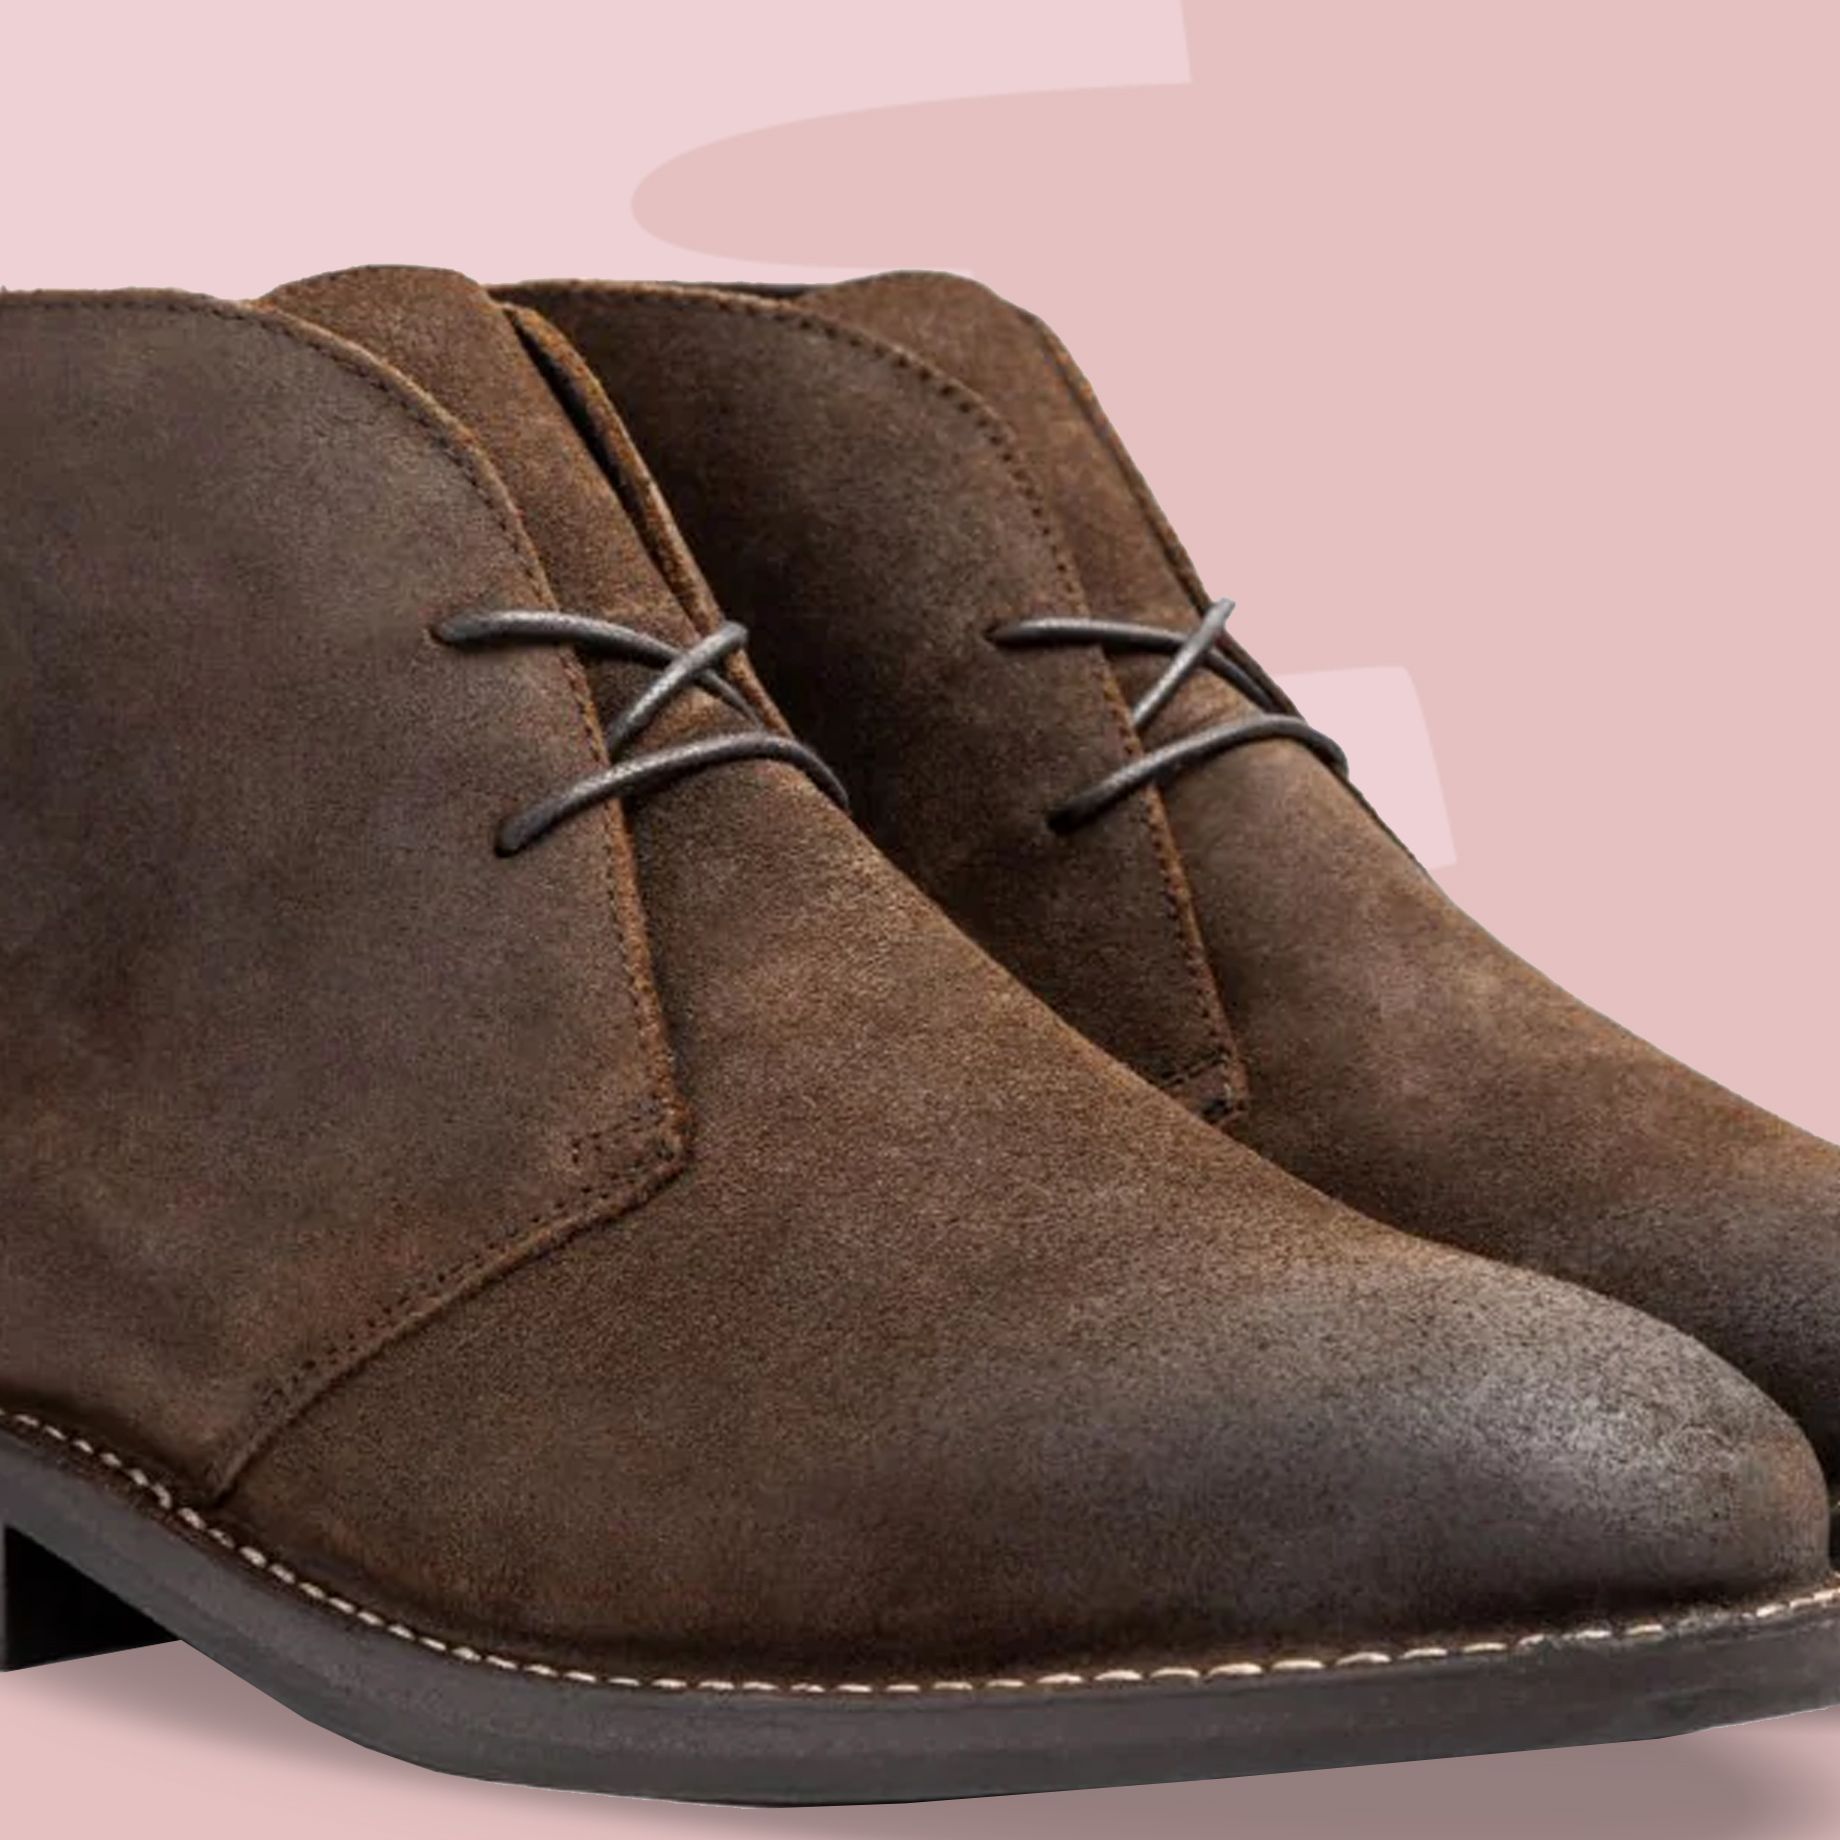 The 15 Best Desert Boots to Carry You Through Winter